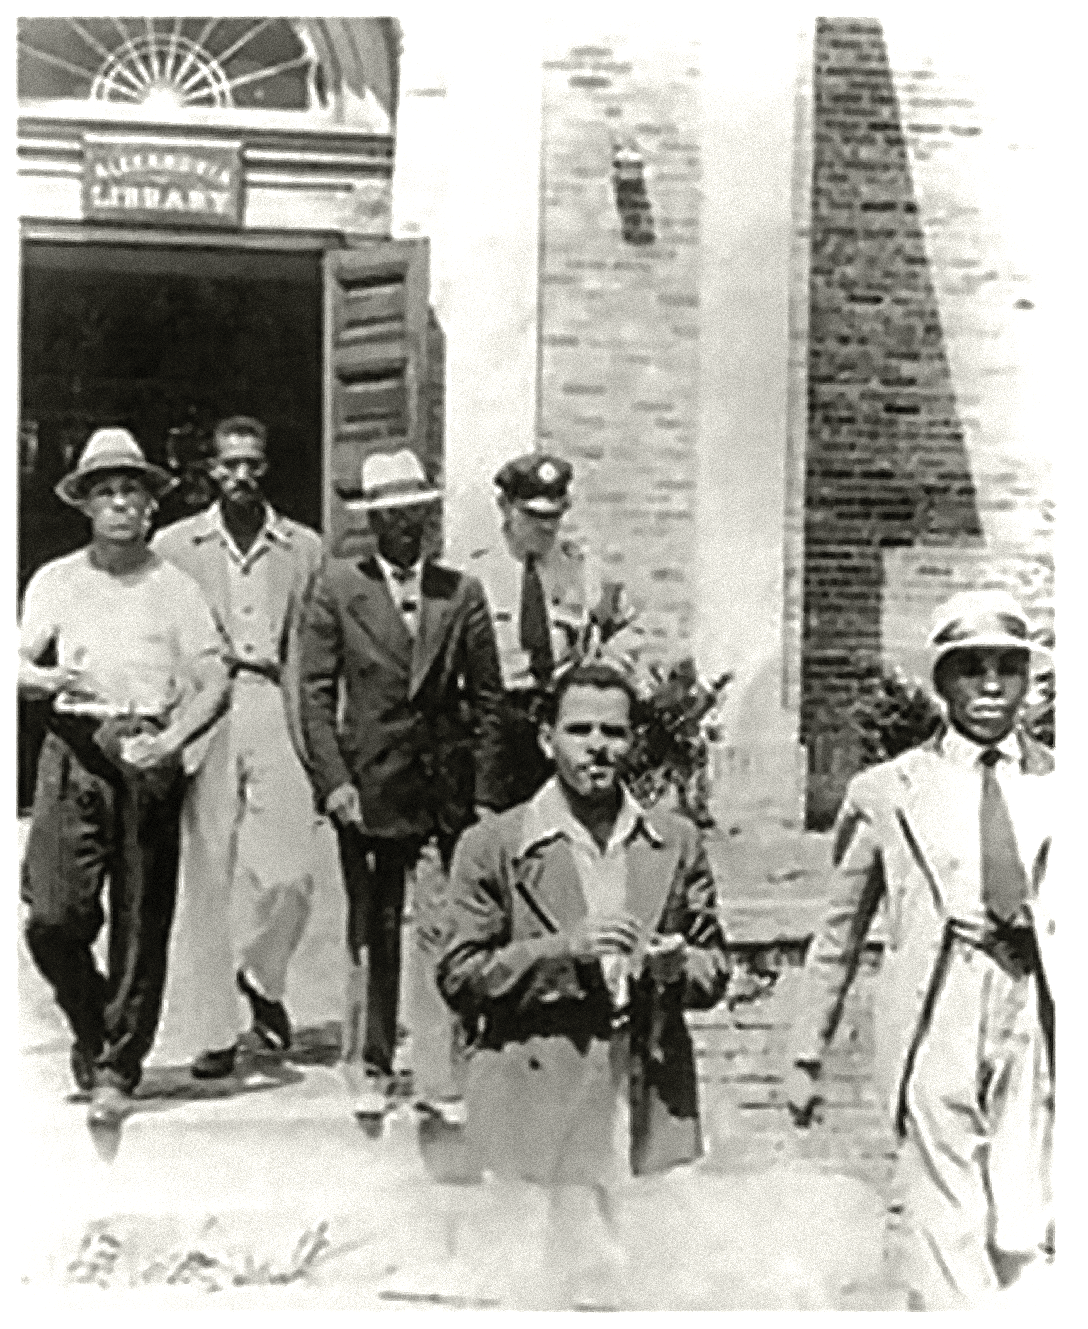 Black men are arrested and led away by police after conducting a sit-in at the all-white public library in Alexandria, August 21, 1939. Alexandria Black History Museum.